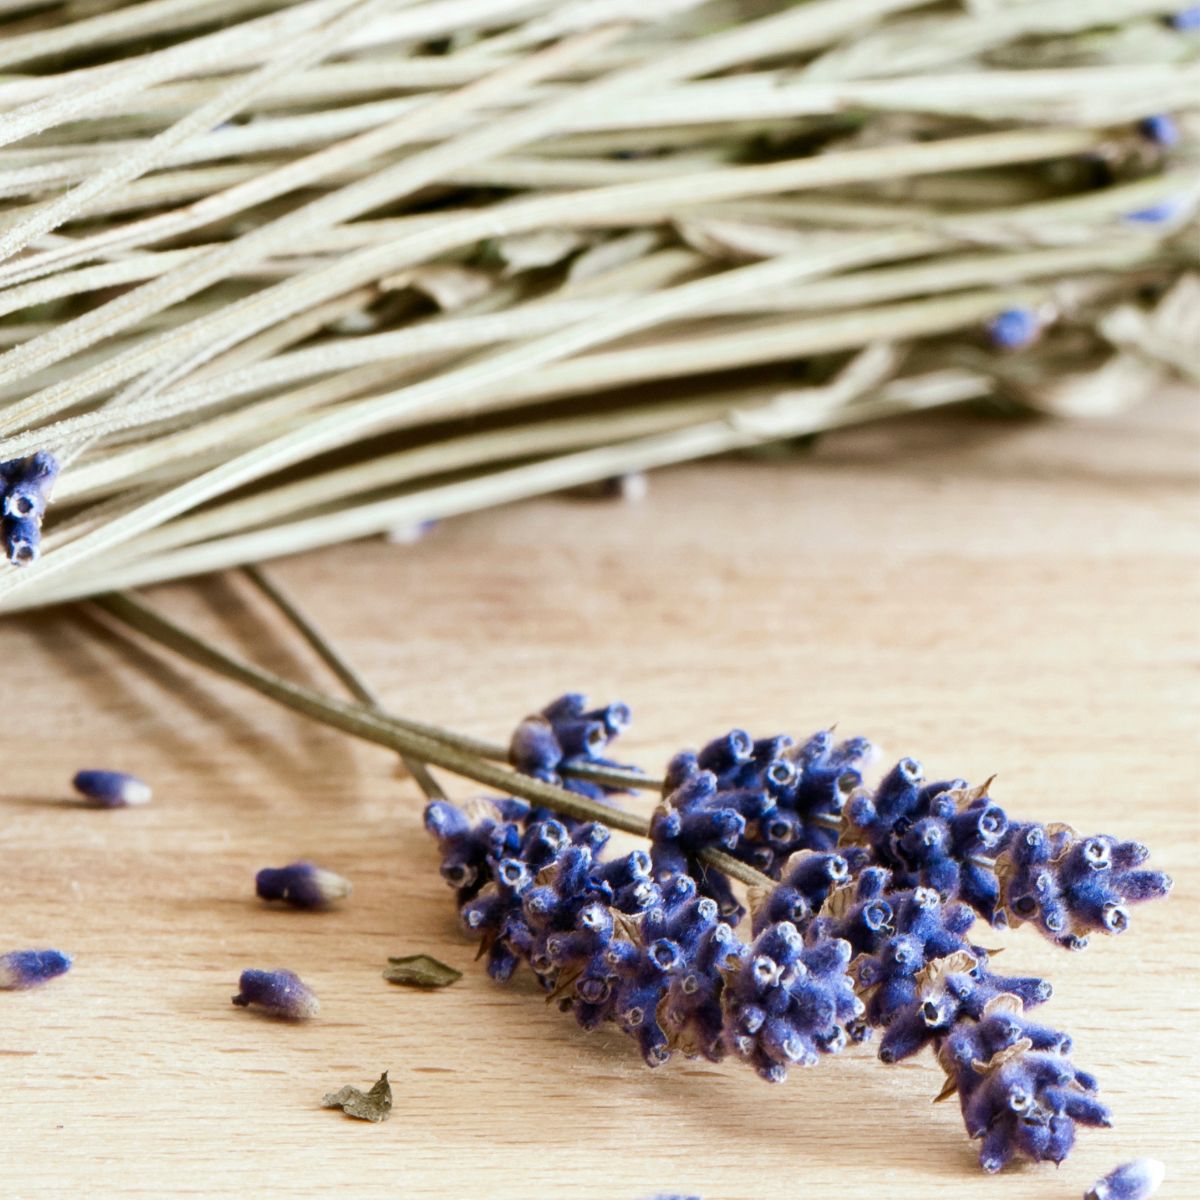 Dried lavender stems and flowers. 